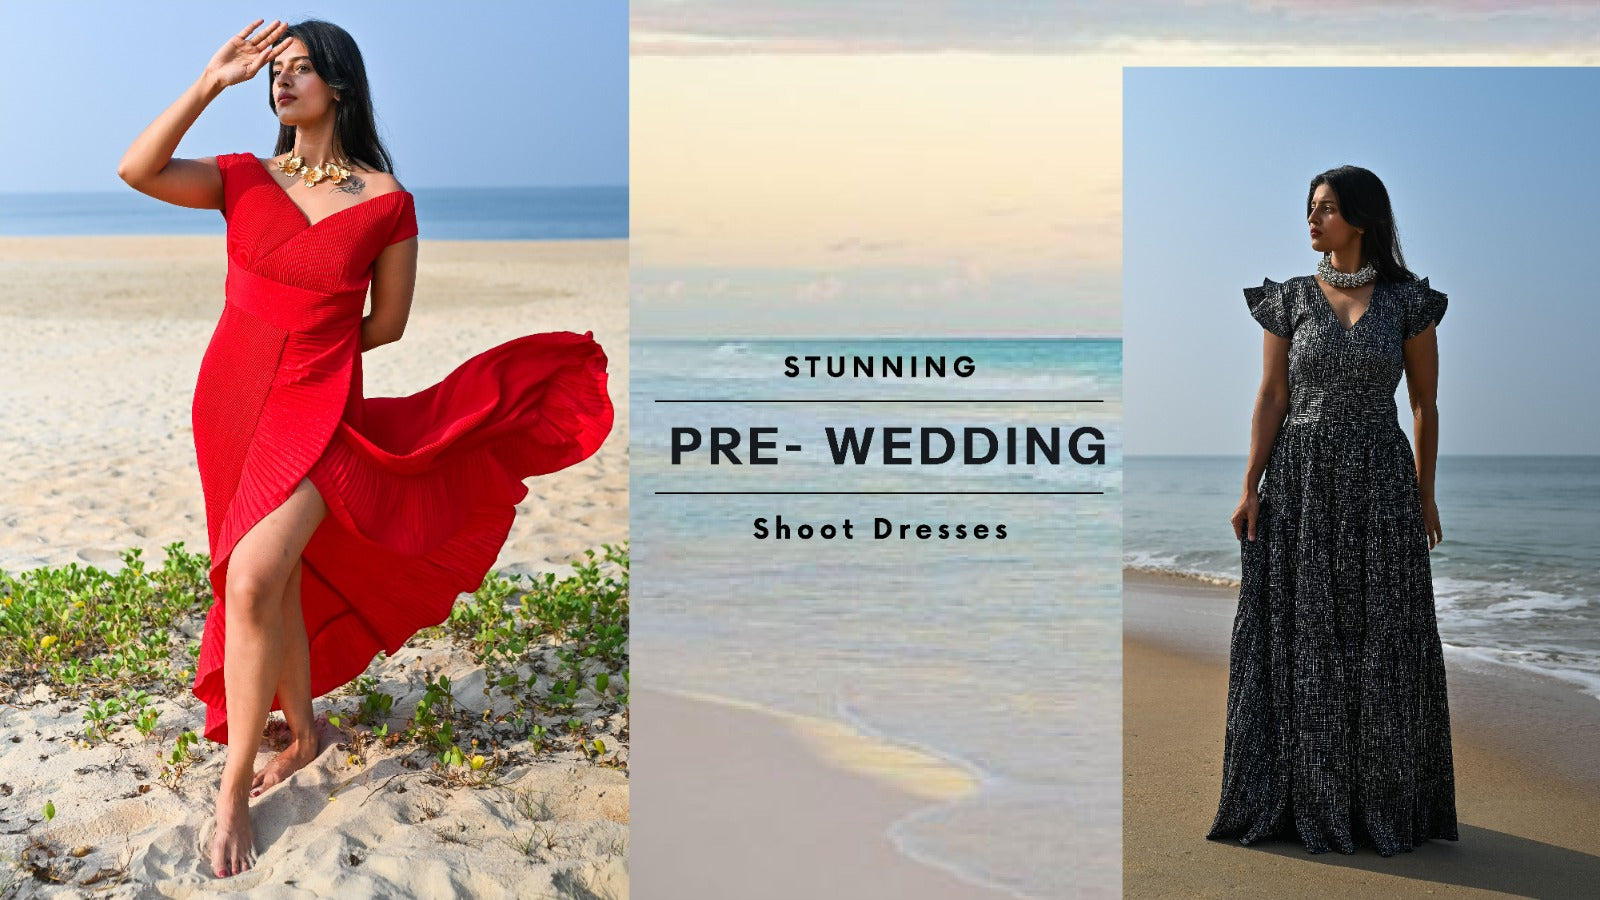 Trendsetting Pre-Wedding Dress Ideas For The Ultimate Photoshoot